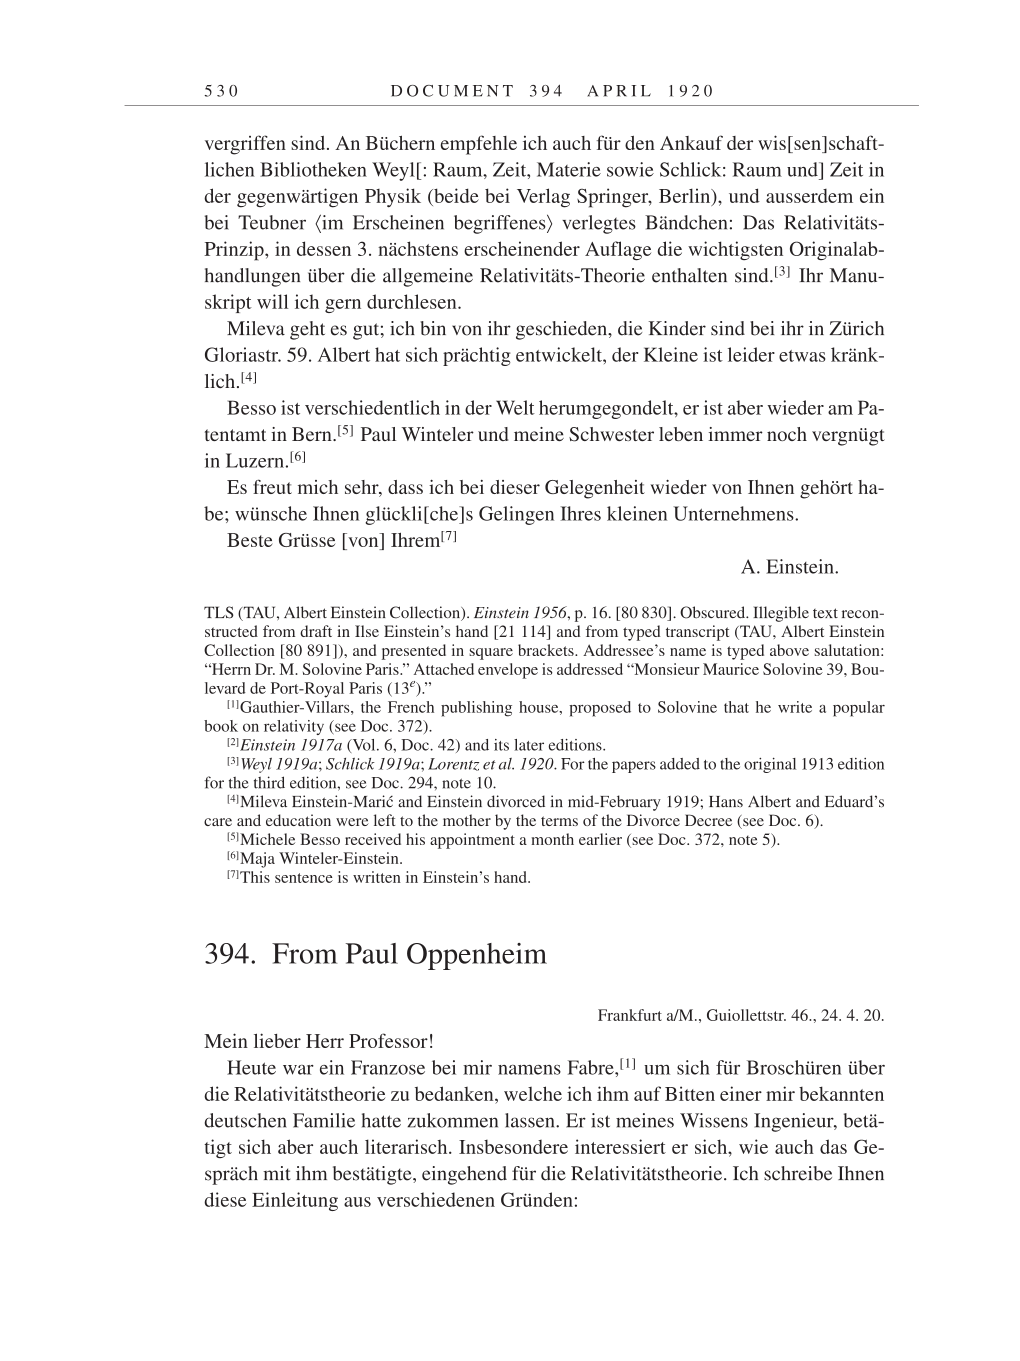 Volume 9: The Berlin Years: Correspondence January 1919-April 1920 page 530